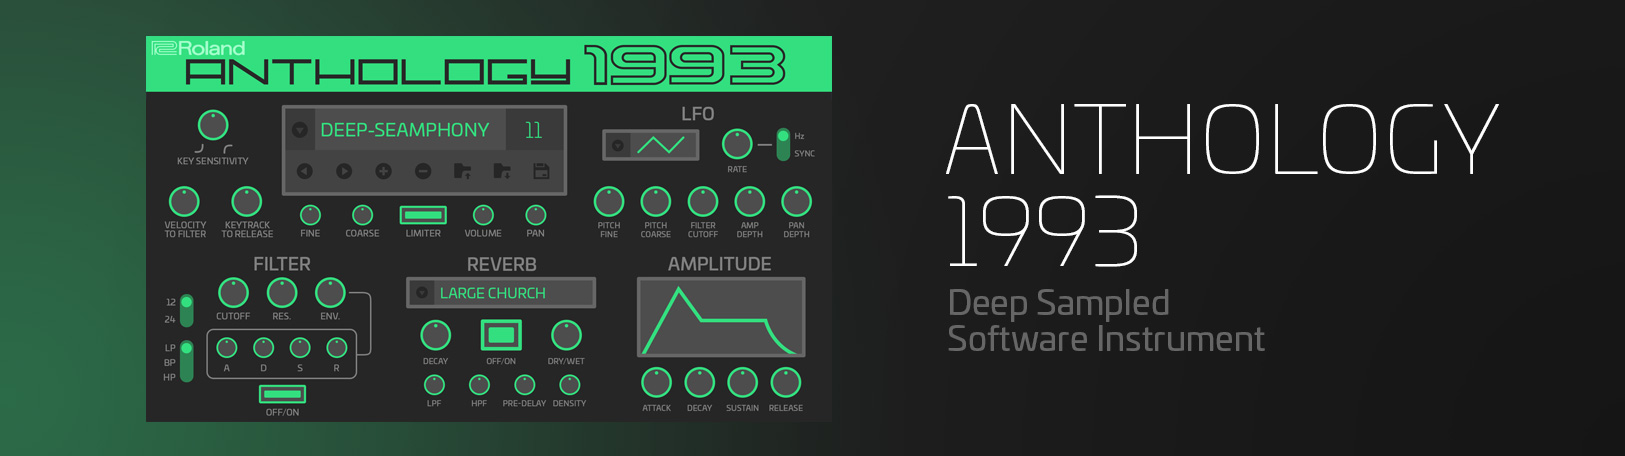 Anthology 1993 Virtual Synth Software Vst Plugin Roland Cloud